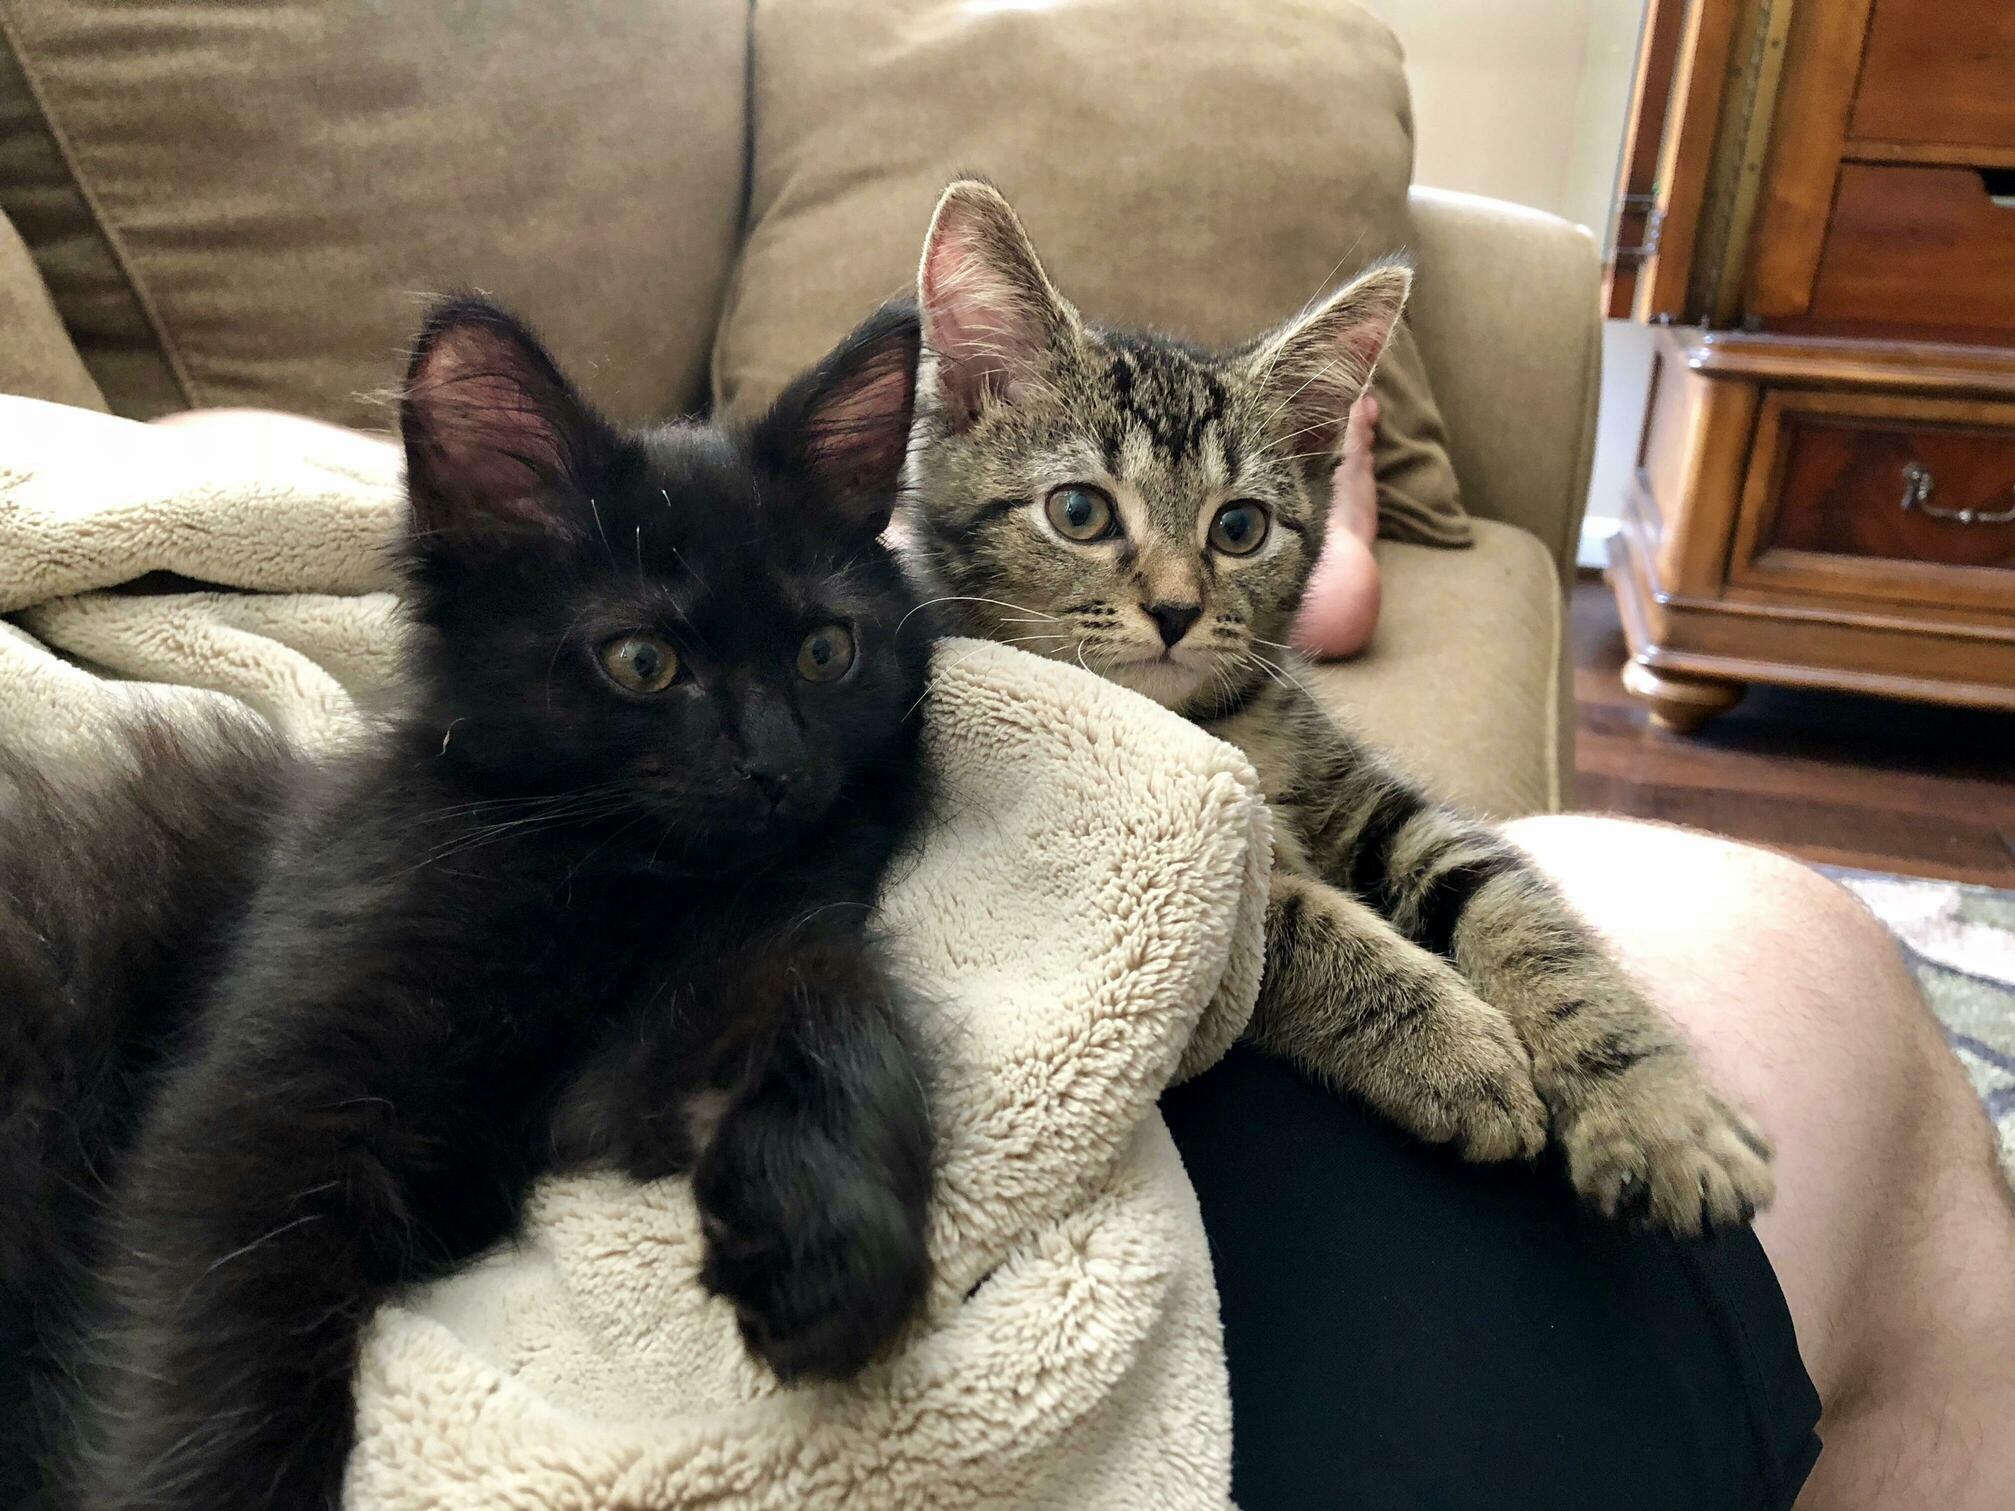 Our new kittens, sam and dean